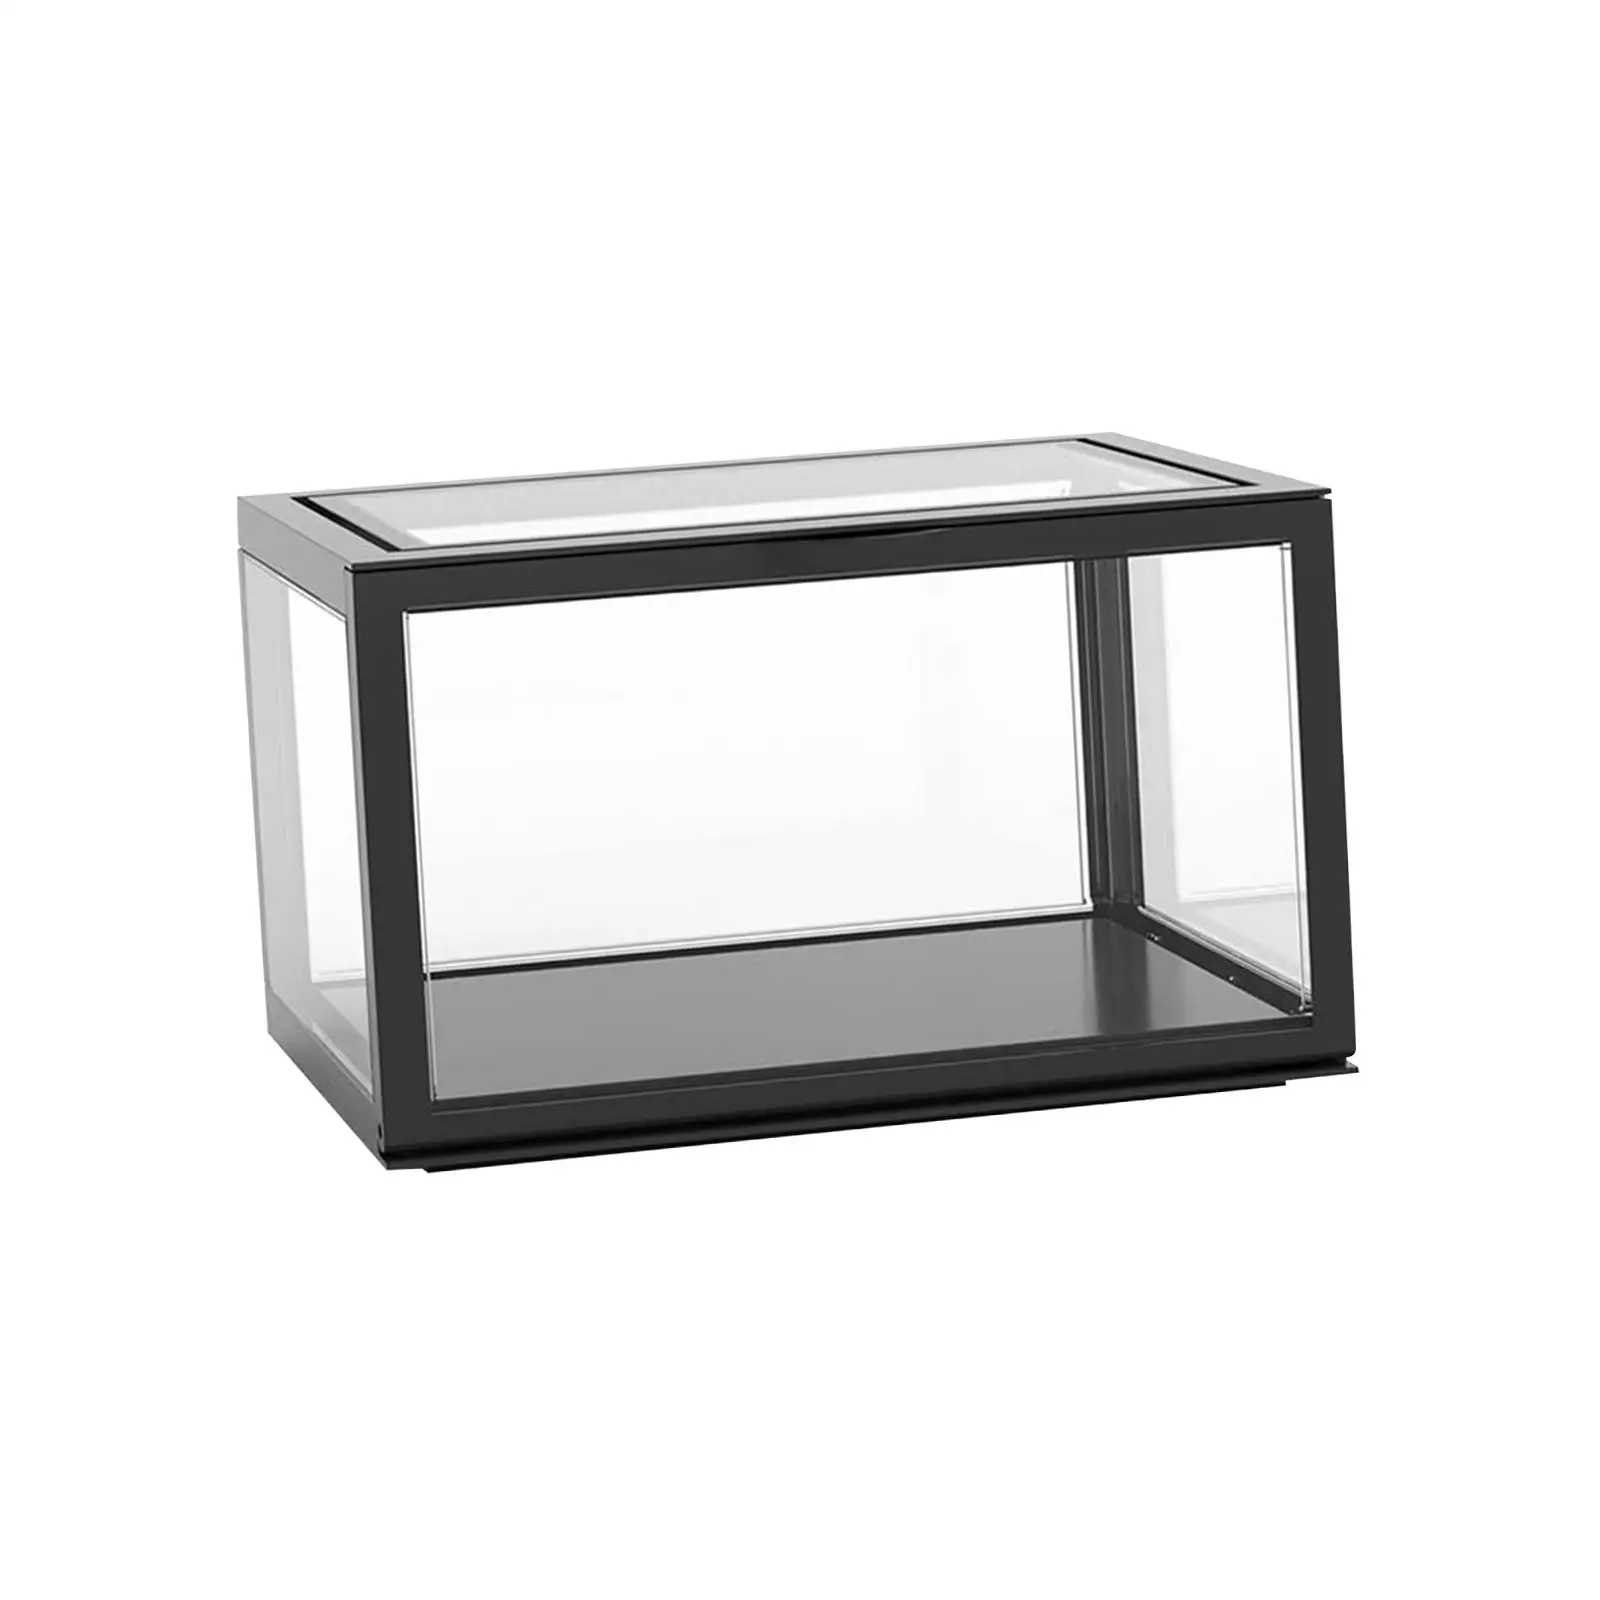 Clear Acrylic Display Case Handicrafts Storage Shelf Display Storage Box Car Model Rack for Souvenirs Collectibles Cosmetics